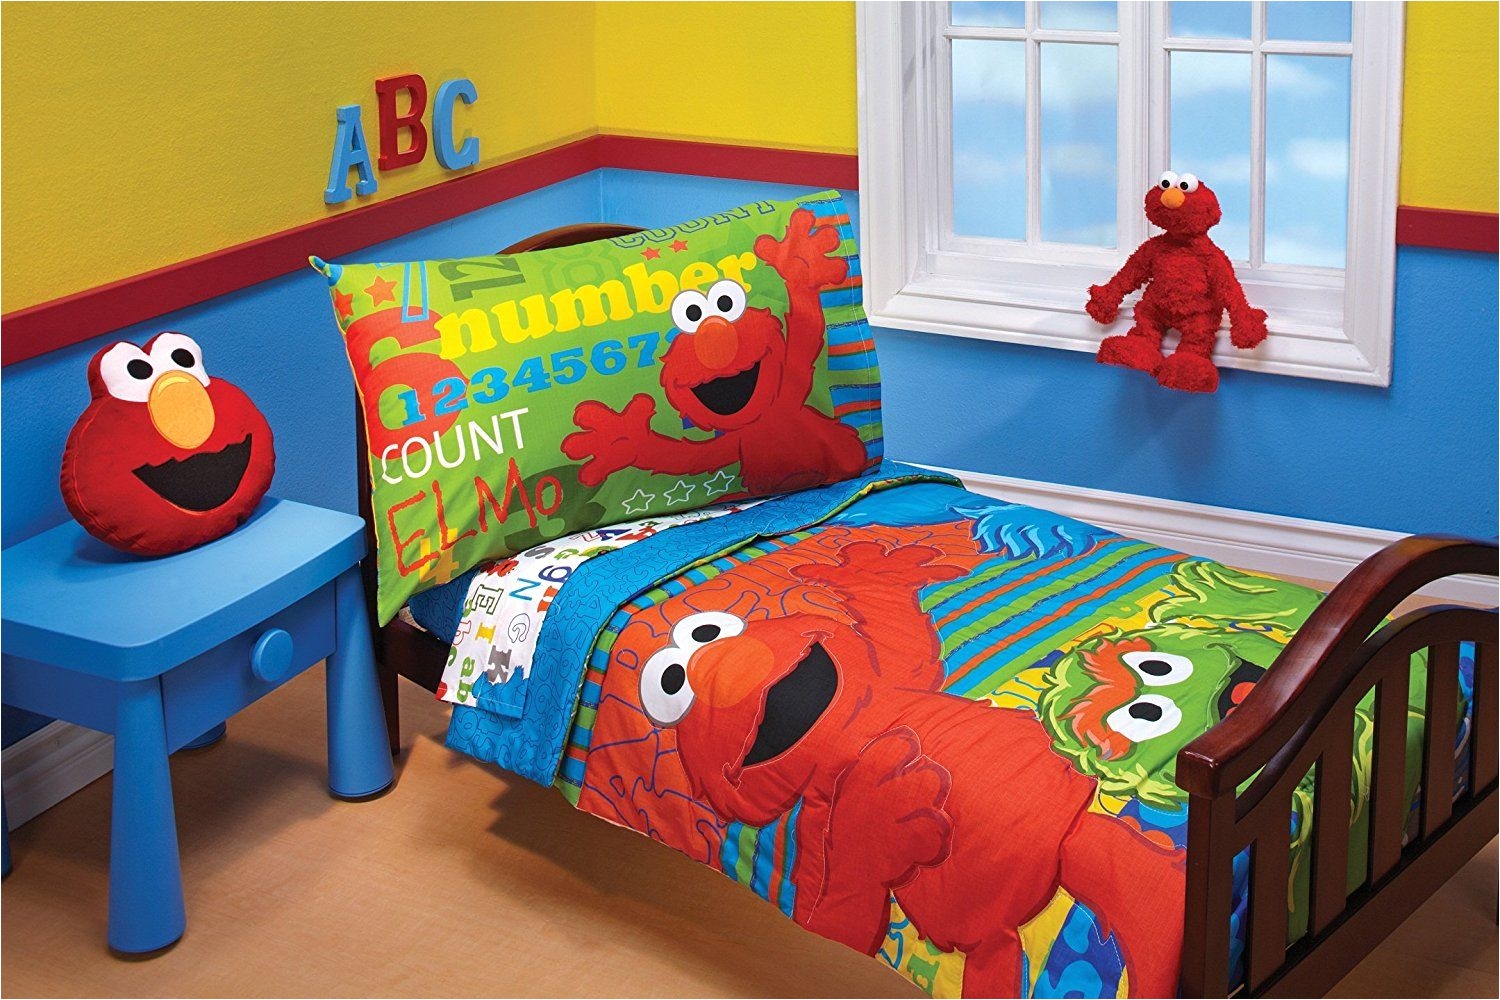 sesame street abc 123 collections will keep your little ones warm and snuggly with this fun toddler bedding set you ll be able to transform their room into